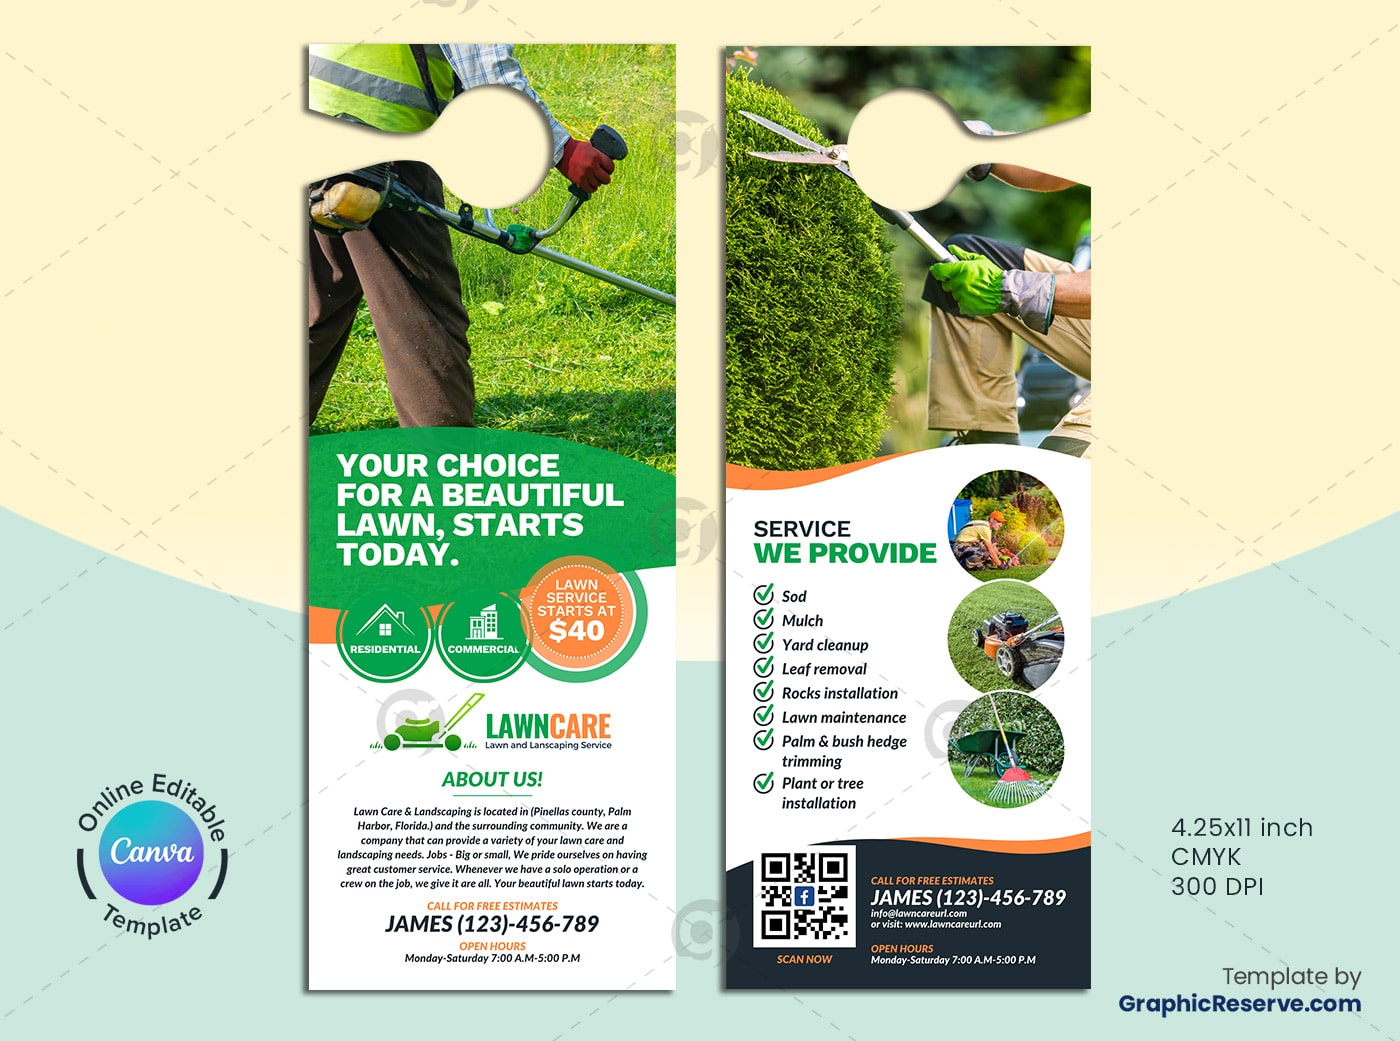 lawn-care-service-door-hanger-canva-template-graphic-reserve